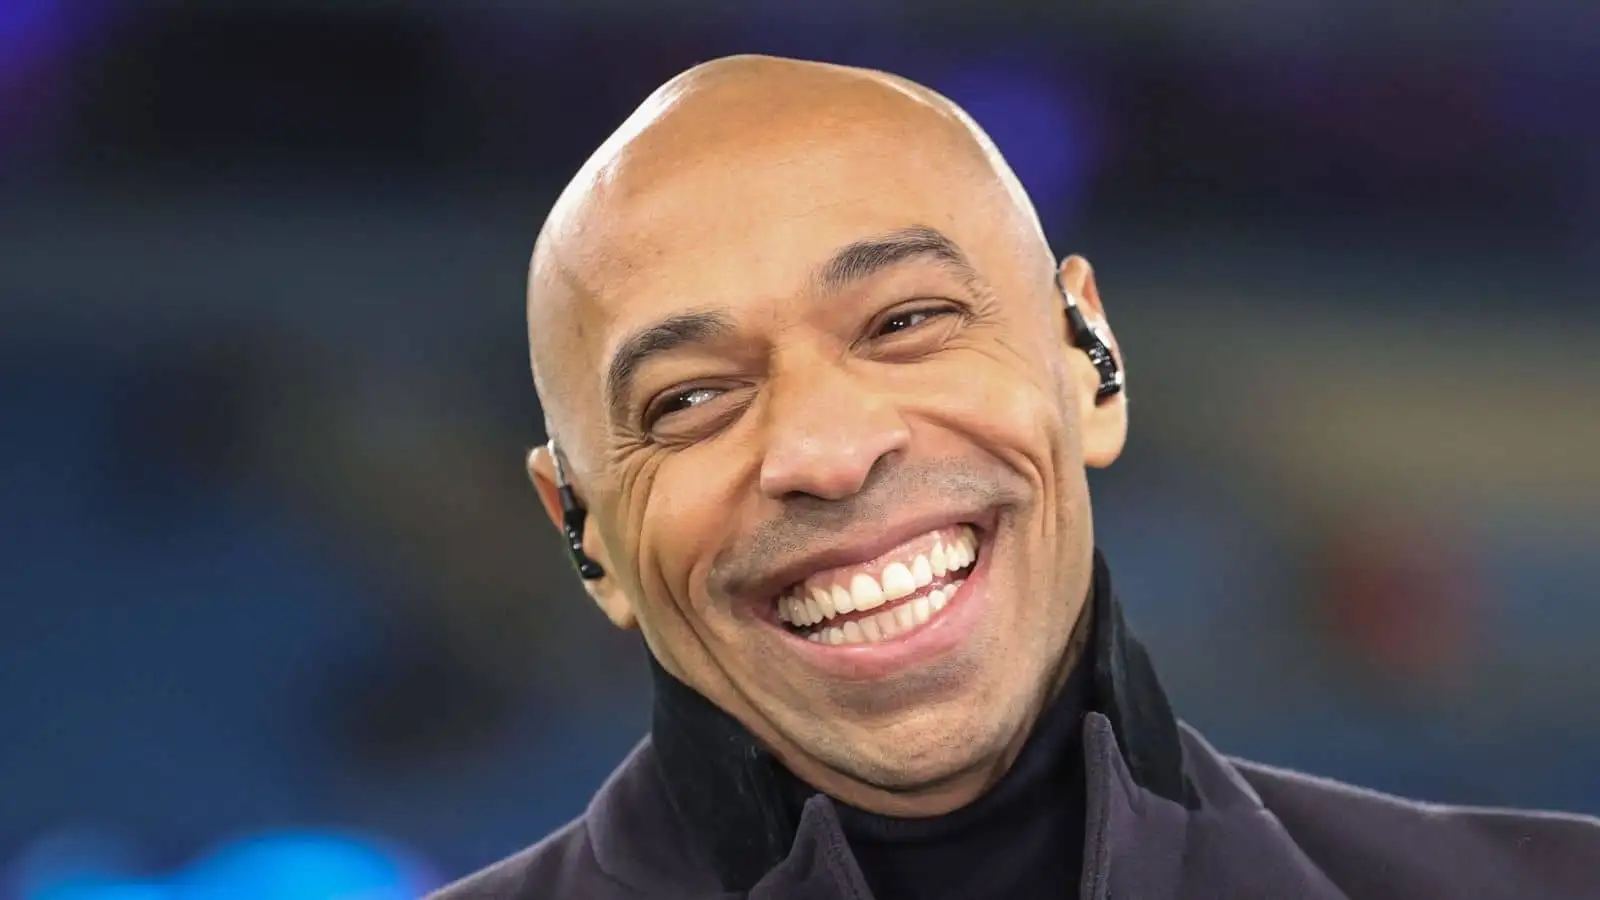 Report claims Arsenal could lose four stars to PSG if Thierry